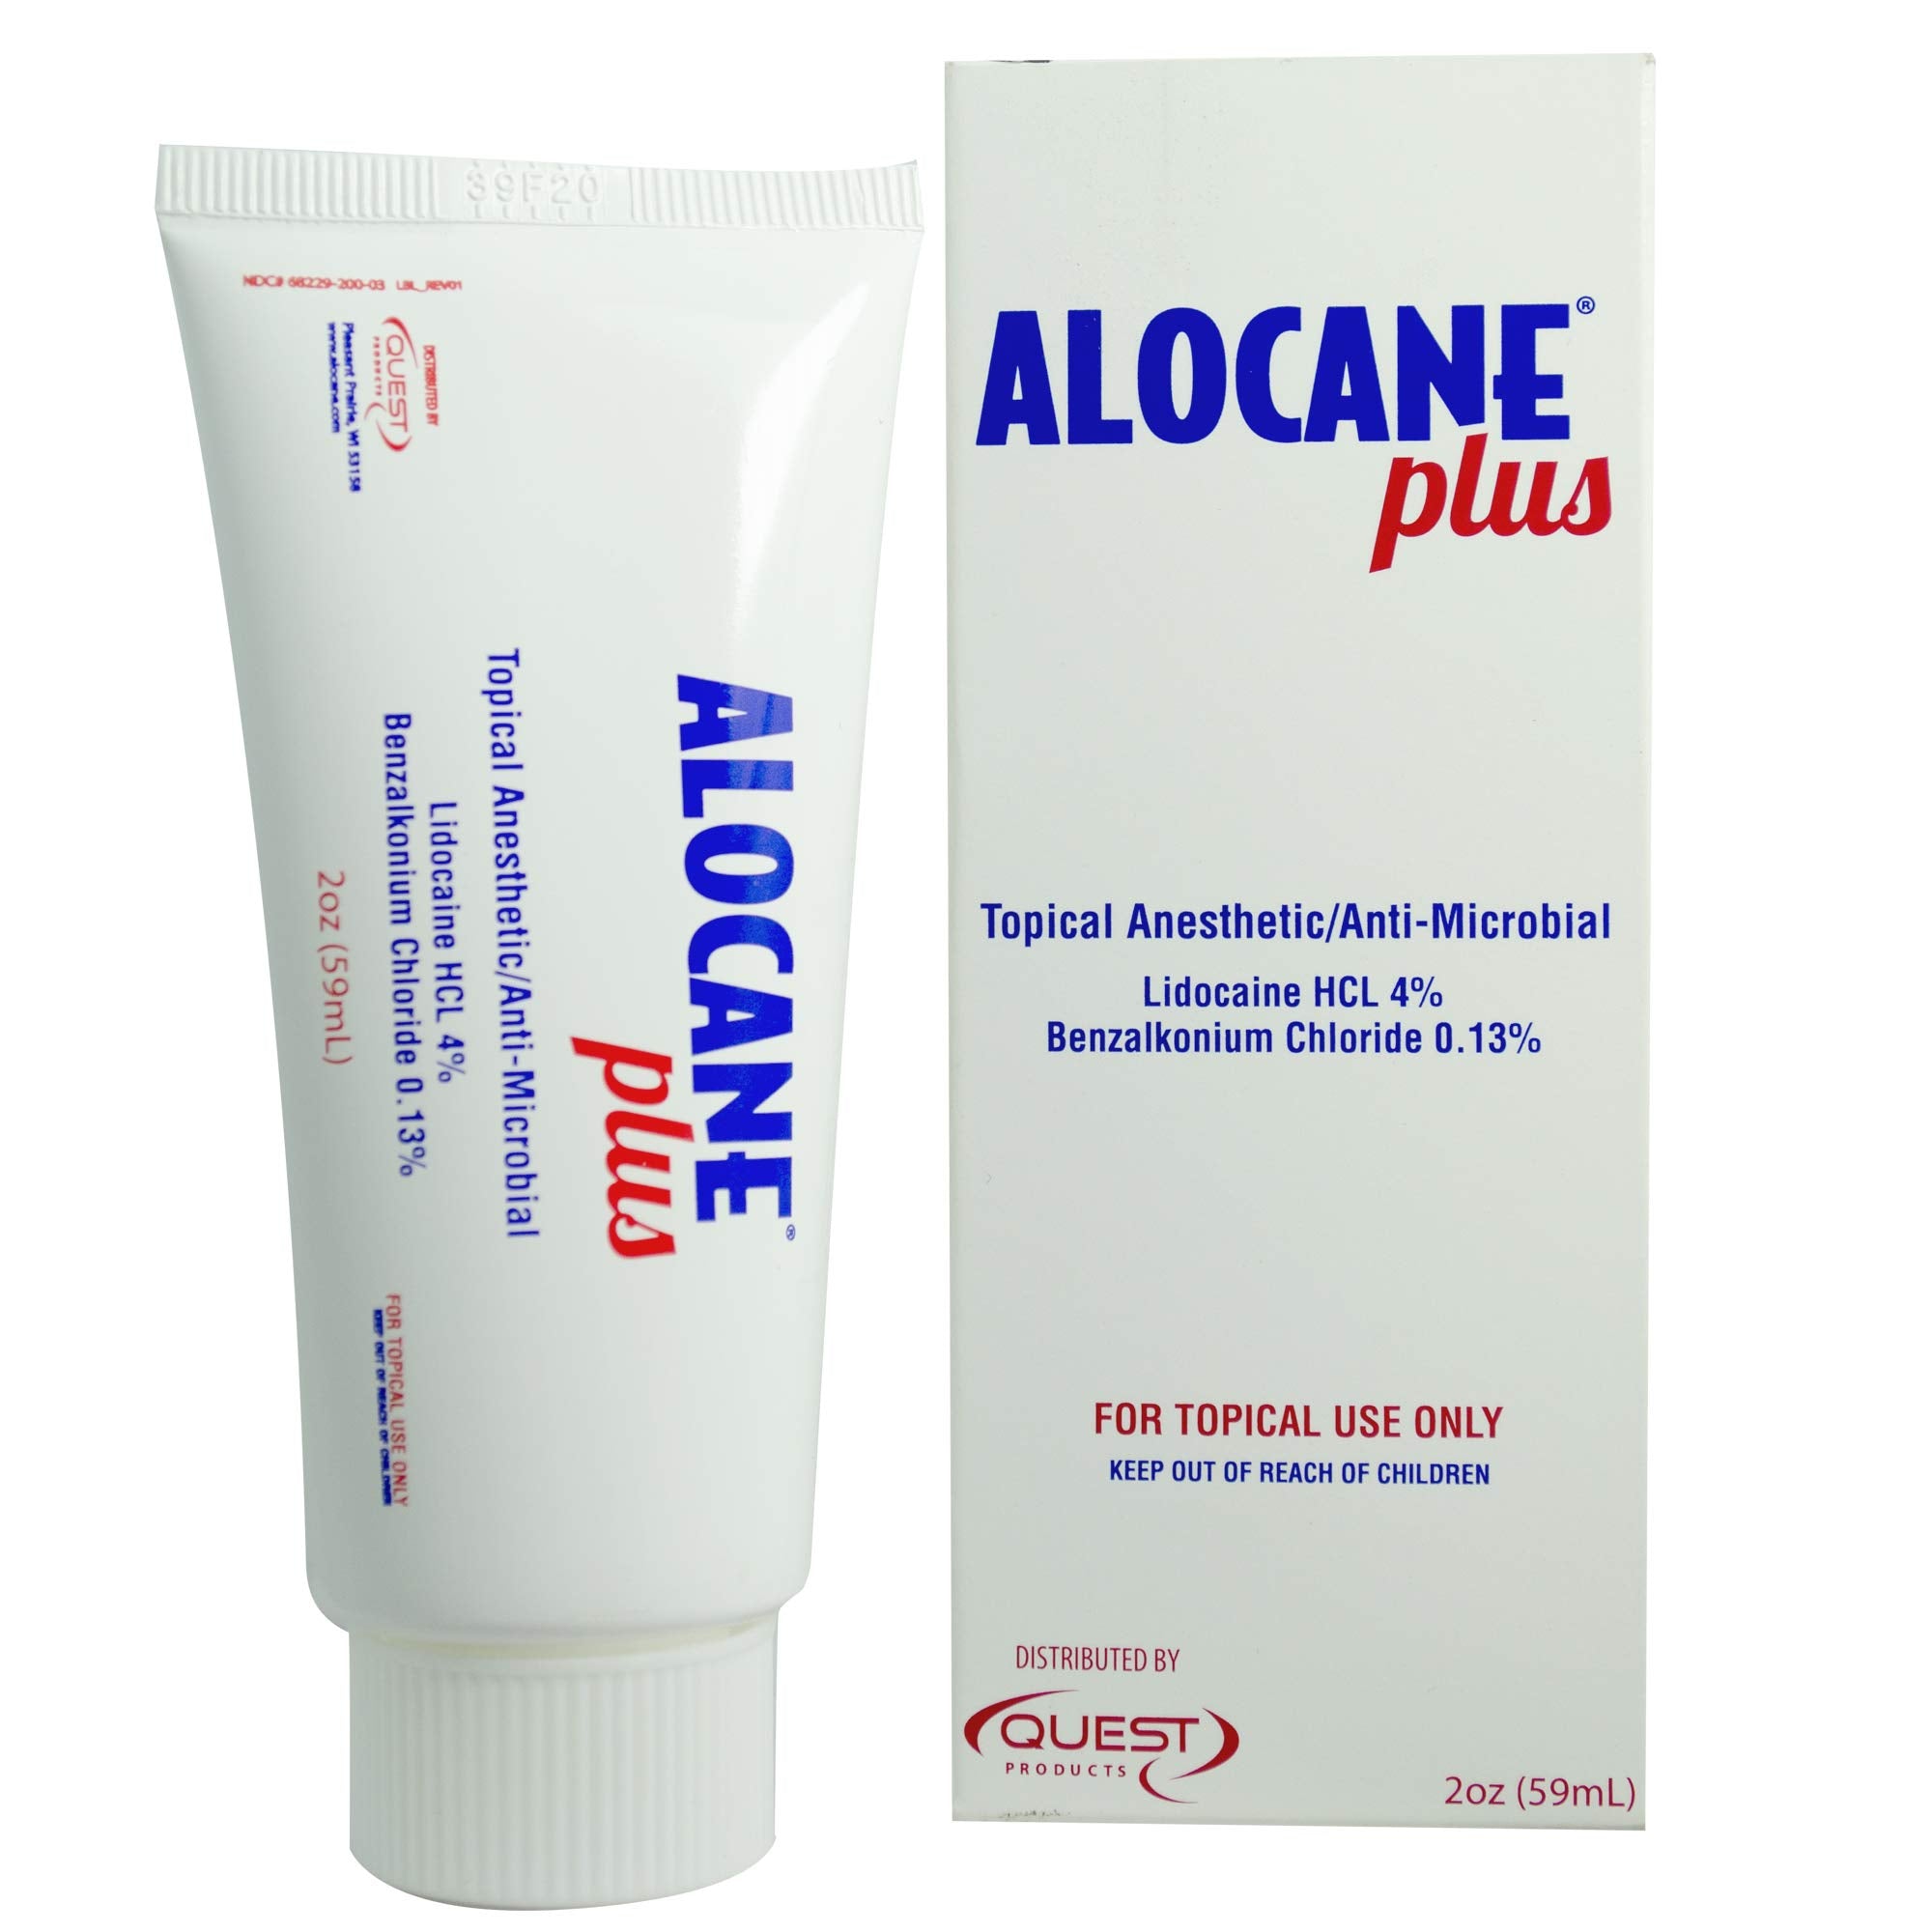 Alocane Plus Topical Anesthetic Emergency Burn Gel Maximum Strength 4% Lidocaine, Commercial Grade, for Restaurants, Manufacturing, Other Heat Related Work Environments, Commercial Use Only, 2 Ounce